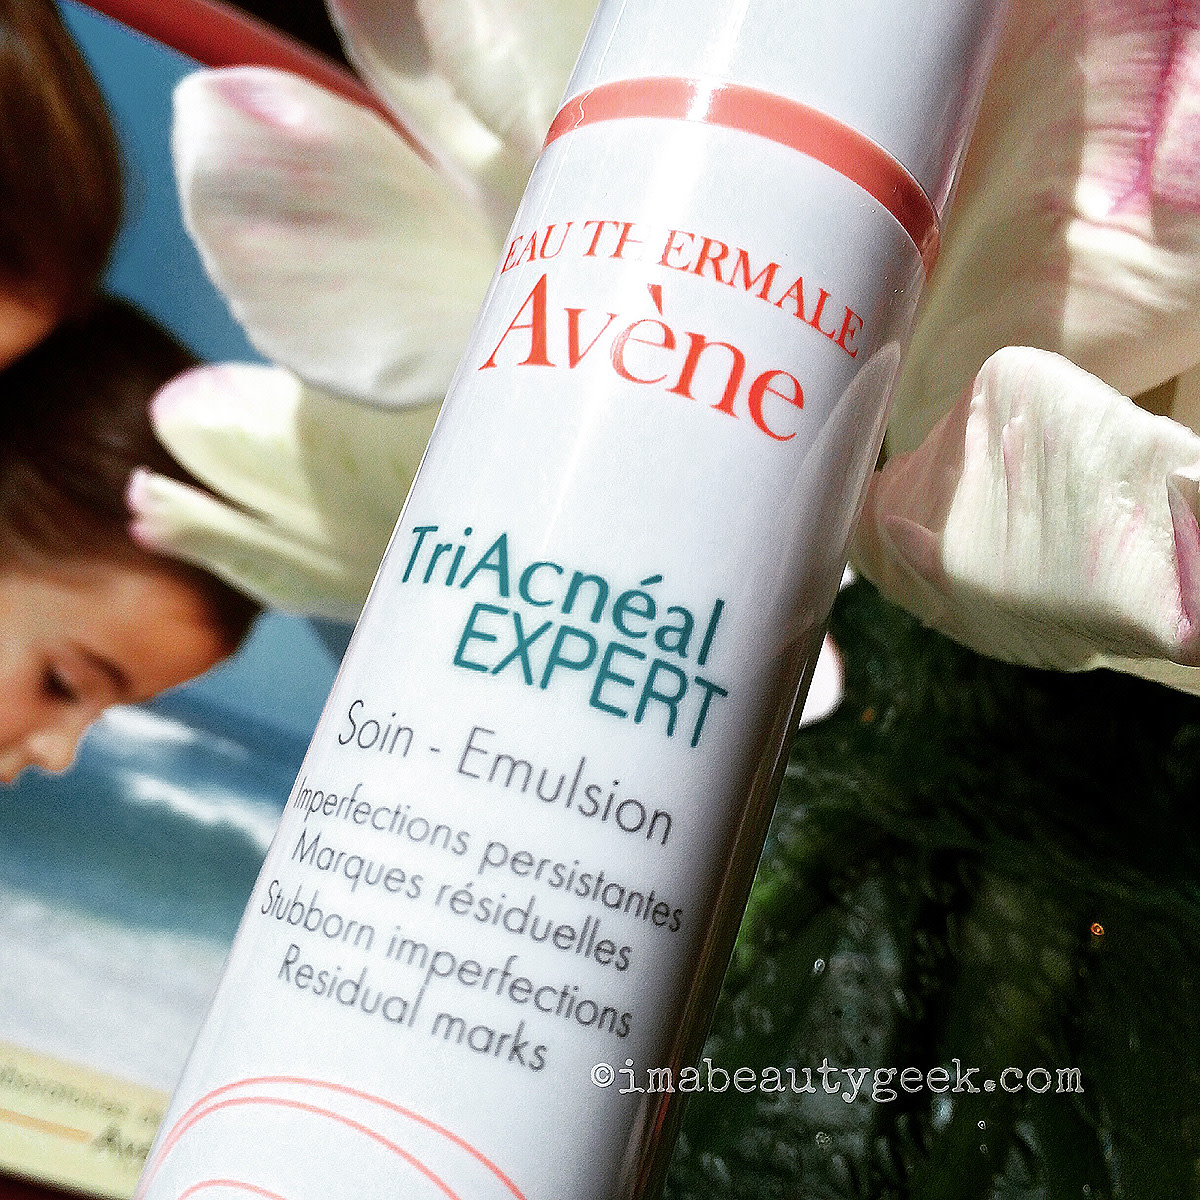 Avene TriAcneal Expert and its sneaky anti-bacterial molecule